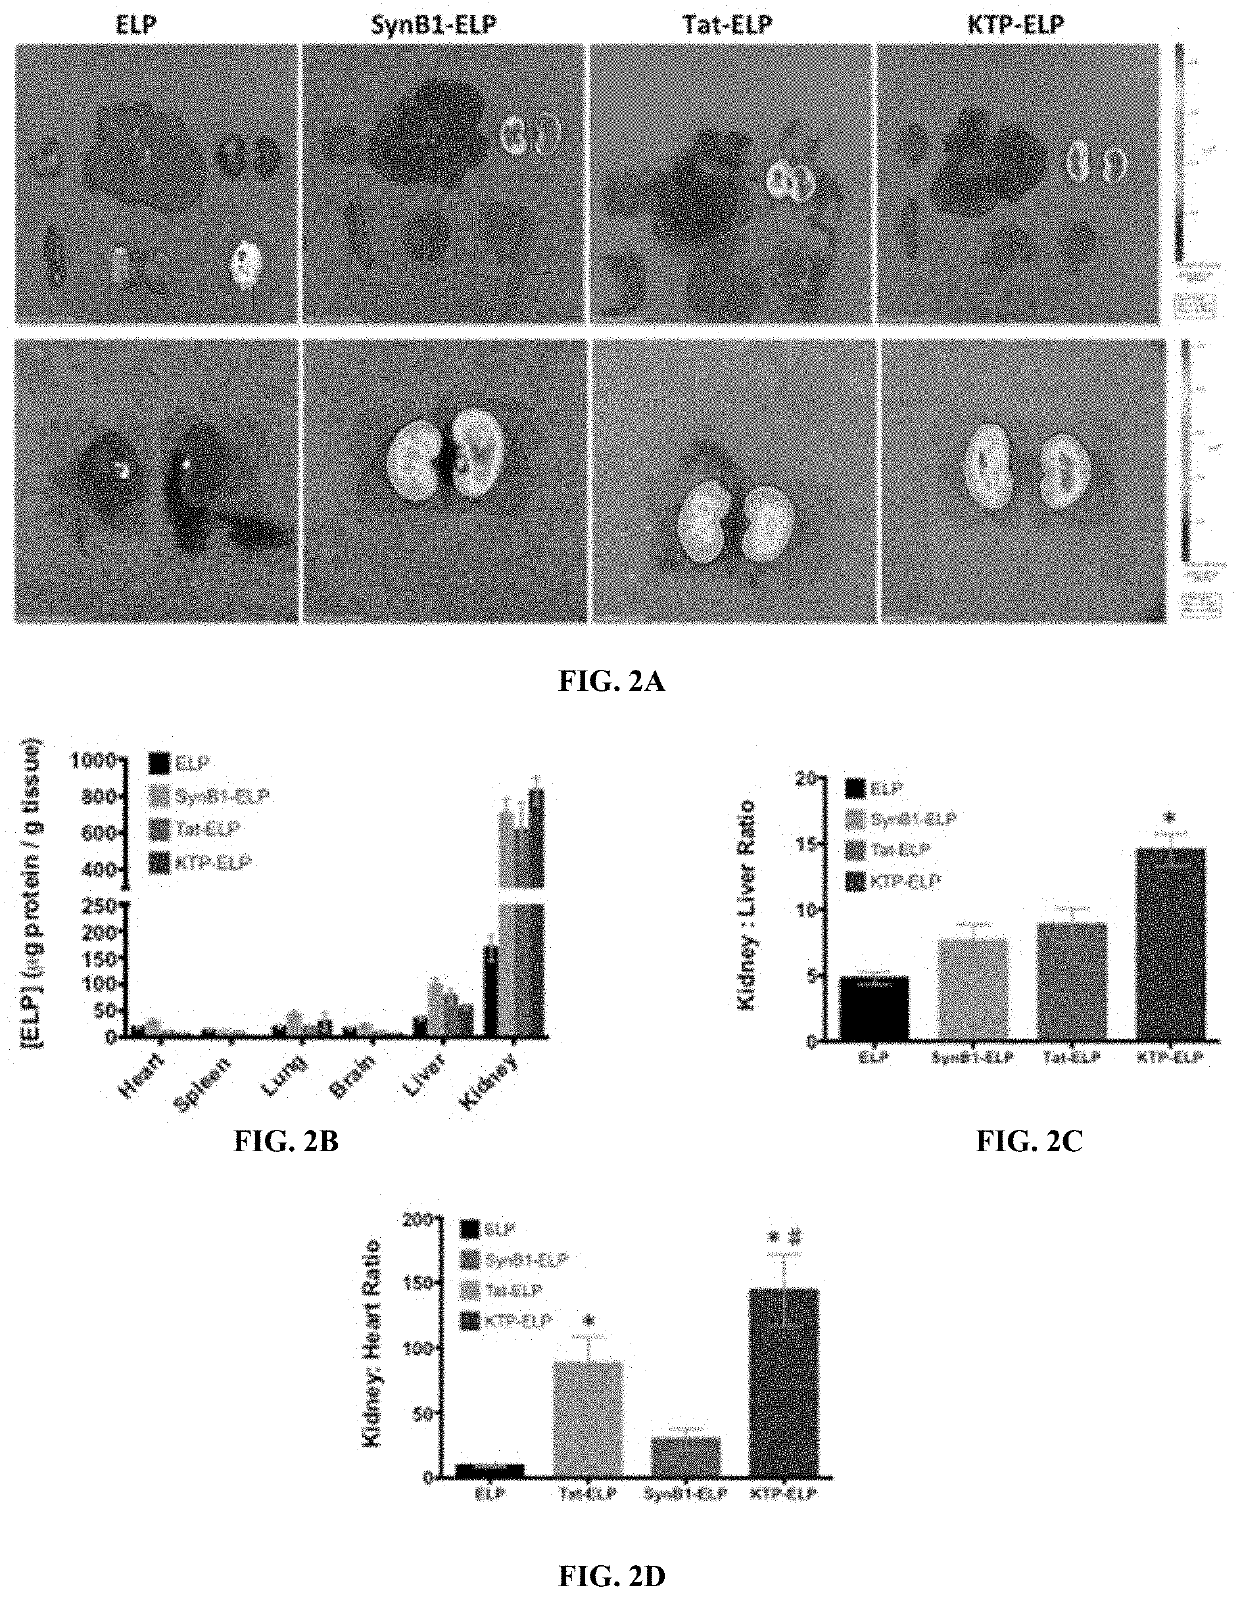 Molecular-Size of Elastin-Like Polypeptide Delivery System for Therapeutics Modulates Intrarenal Deposition and Bioavailability